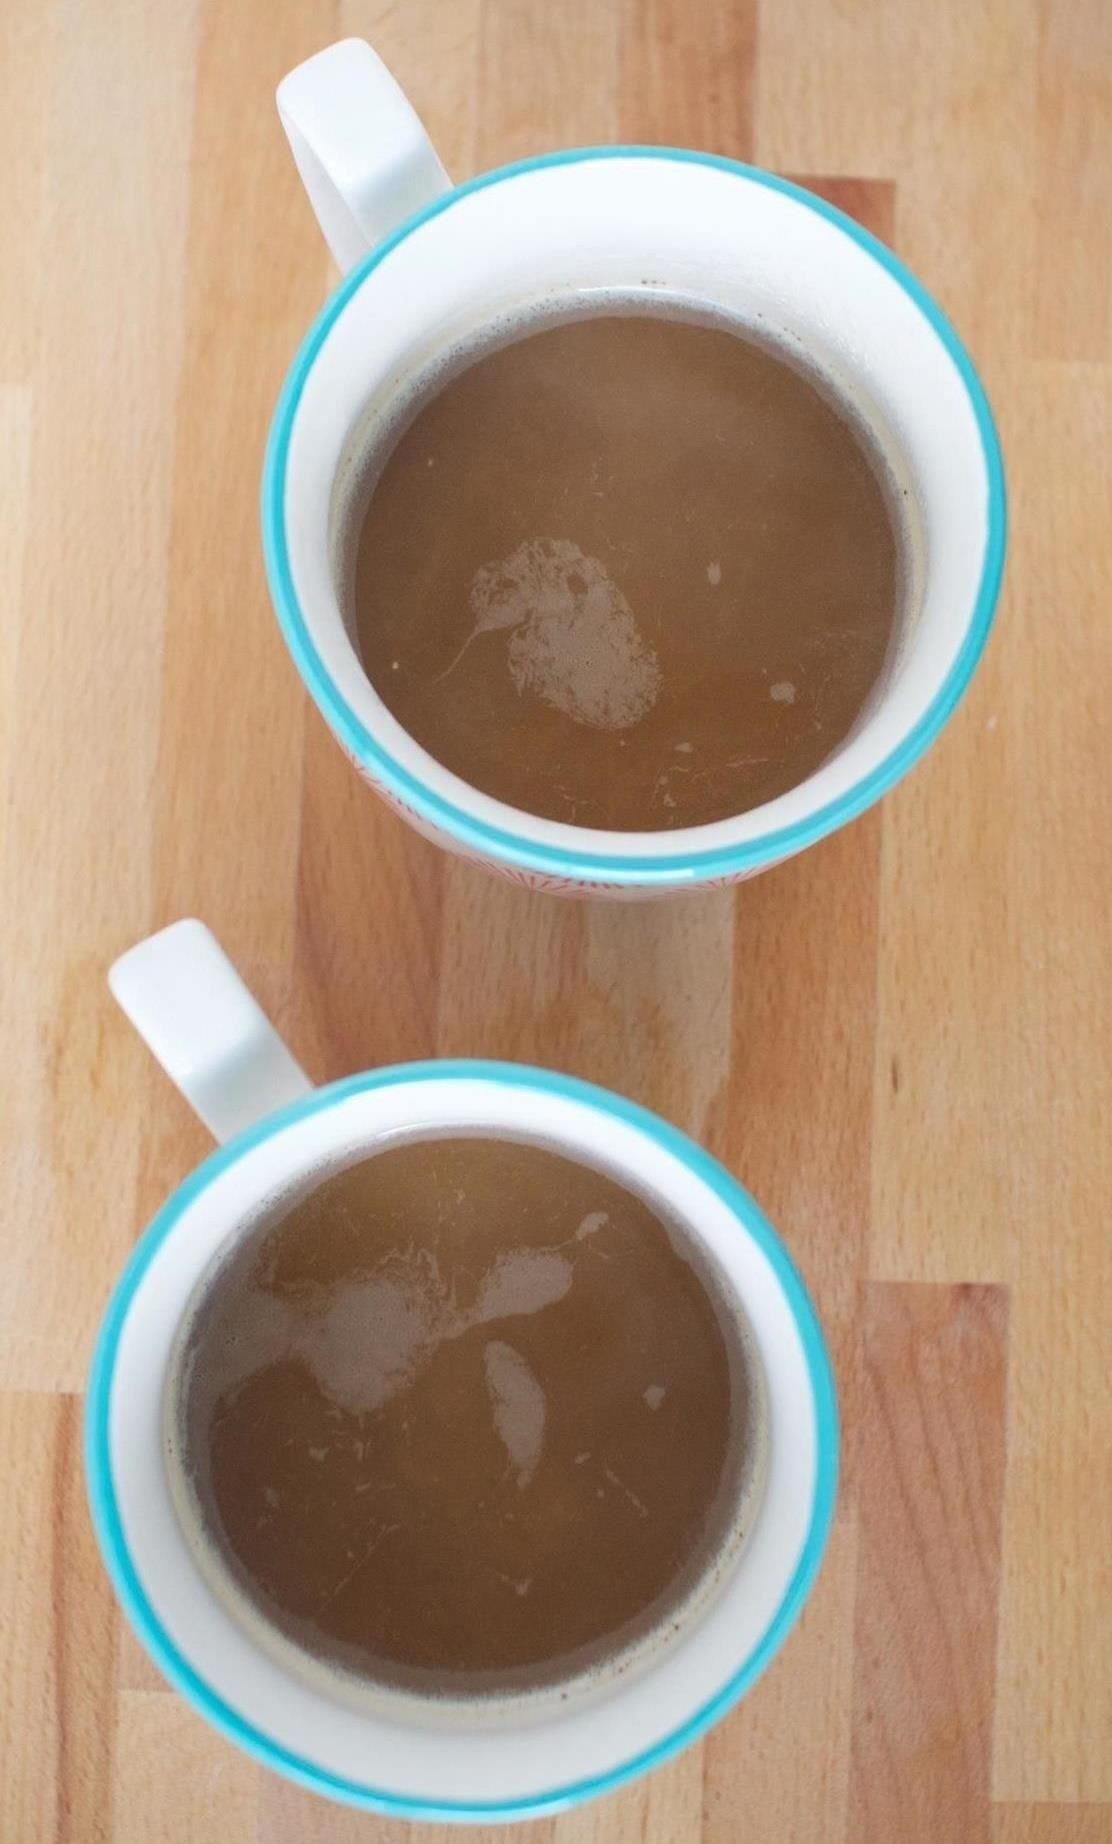 This French Press Hack Makes DIY Almond Milk a Snap